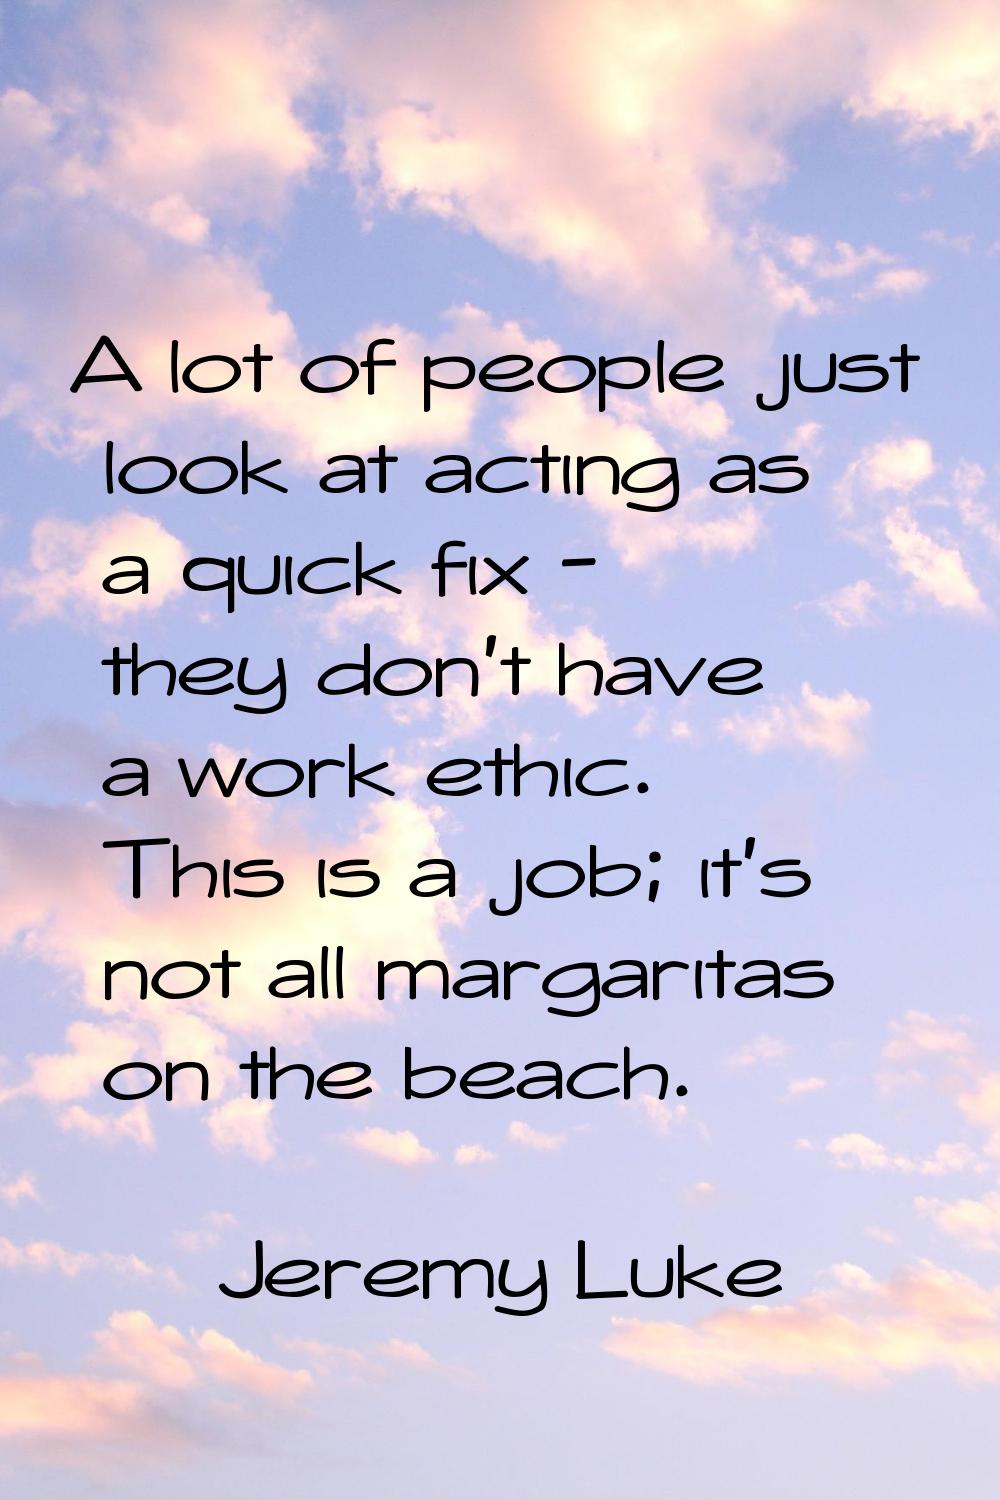 A lot of people just look at acting as a quick fix - they don't have a work ethic. This is a job; i